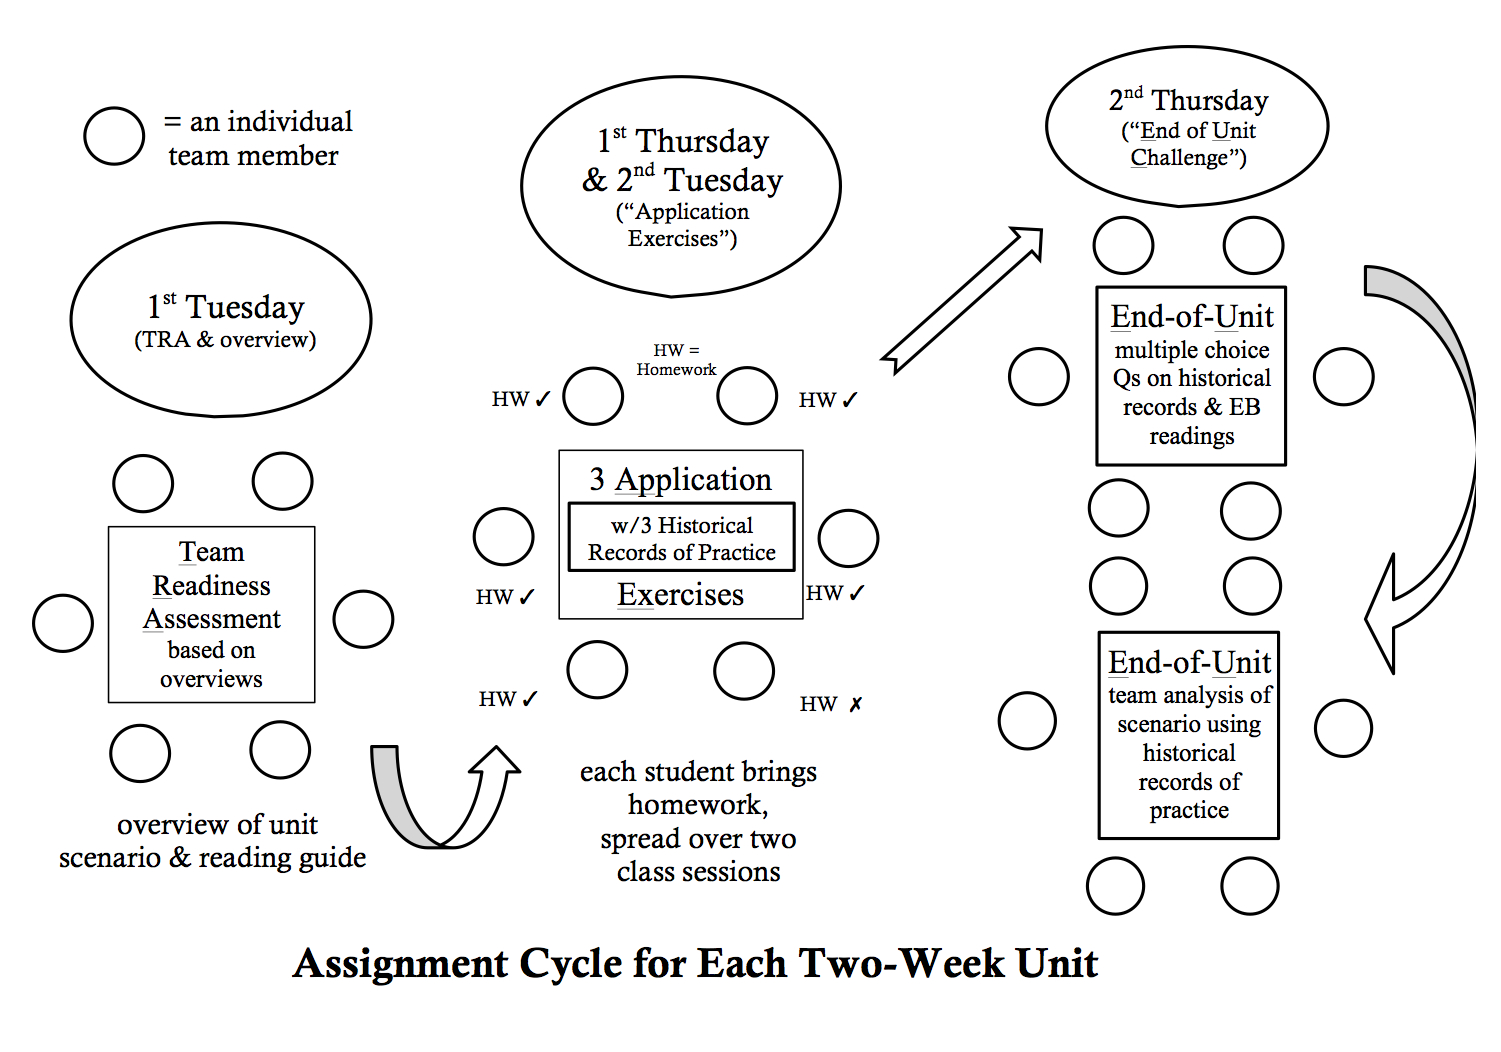 diagram of assignment cycle described in chart on this page